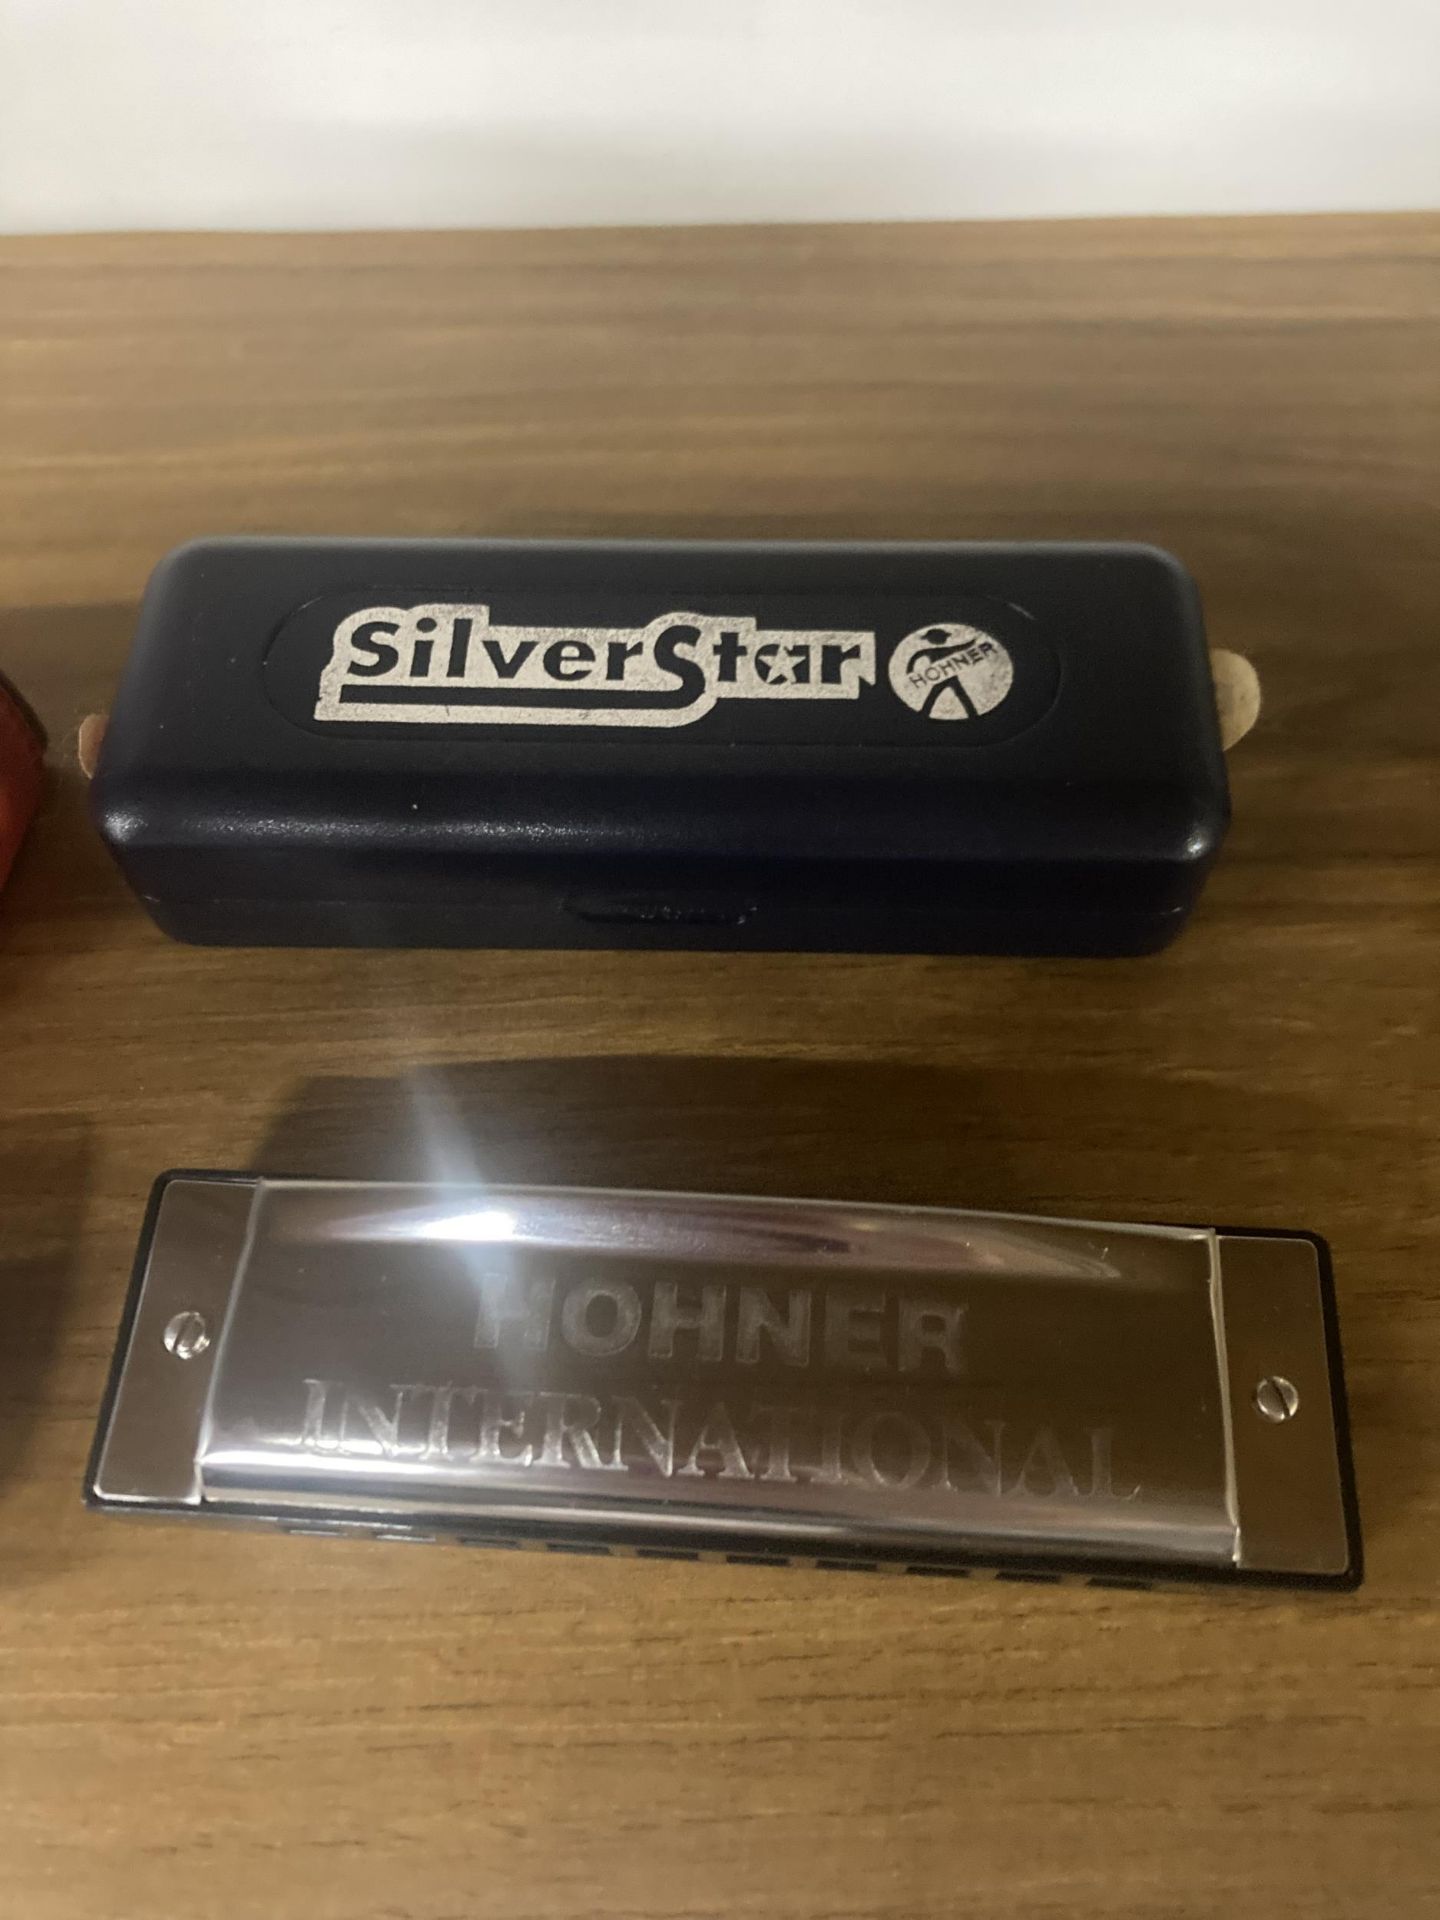 TWO HARMONICAS TO INCLUDE A HOHNER SILVER STAR IN KEY D PLUS A HOHNER STUDENT HARMONICA - Image 3 of 3